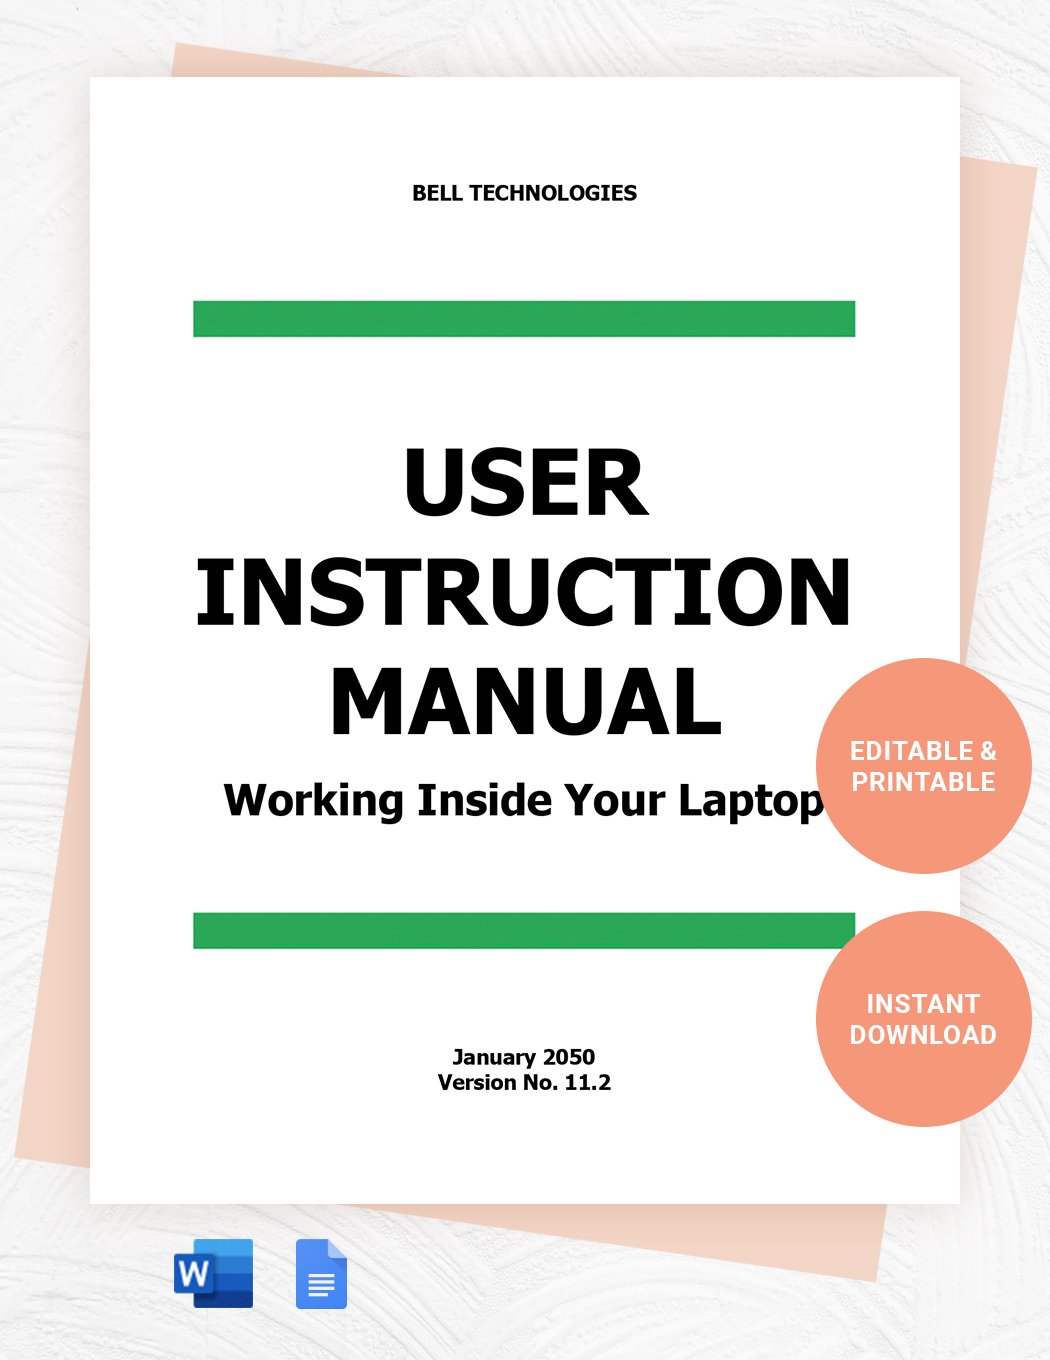 Technical Instruction Manual Template Download in Word, Google Docs